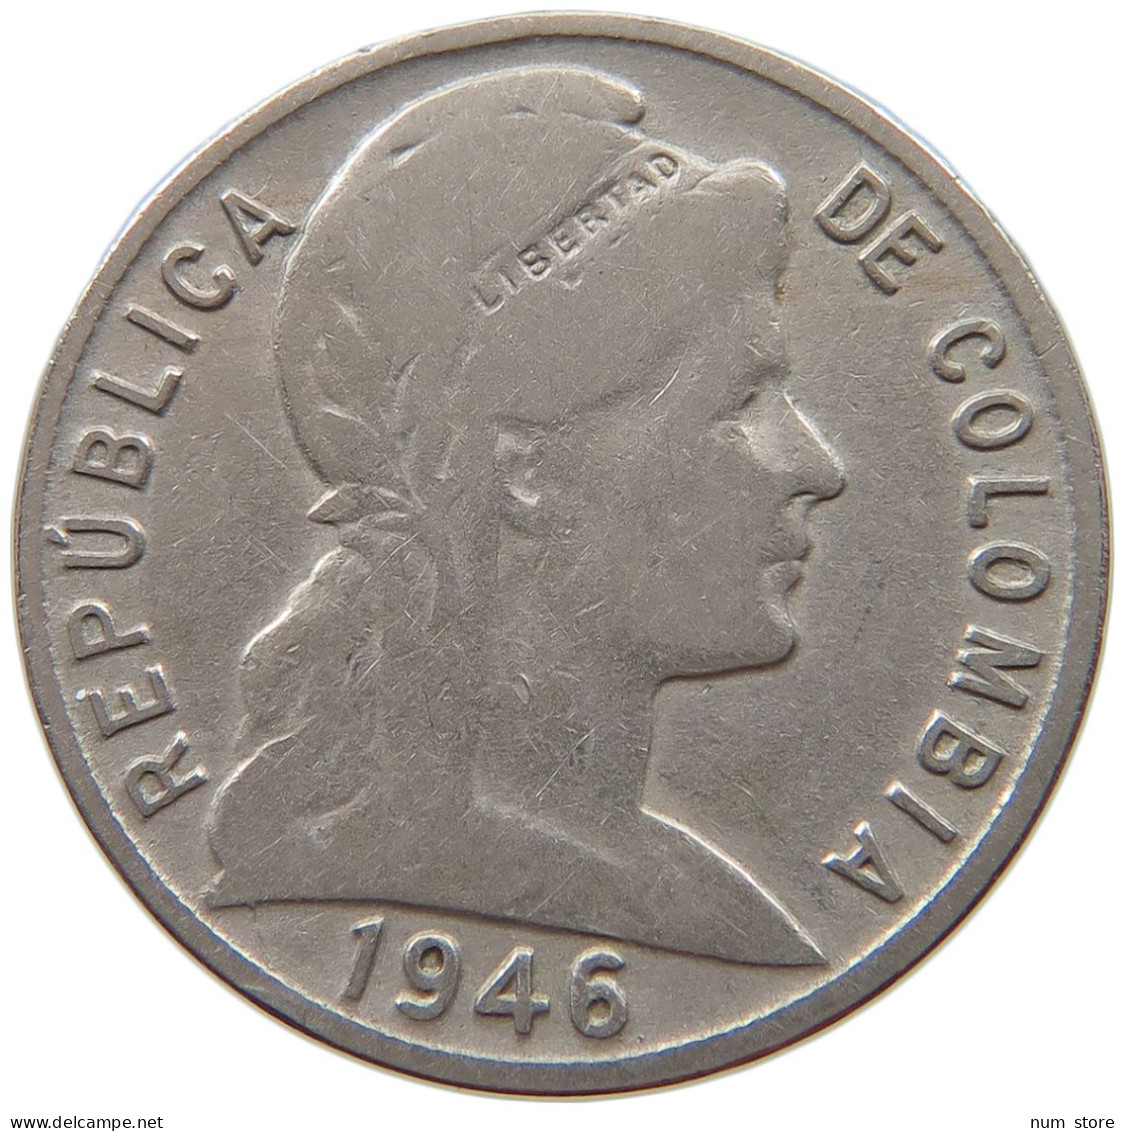 COLOMBIA 5 CENTAVOS 1946 #a017 0777 - Colombie